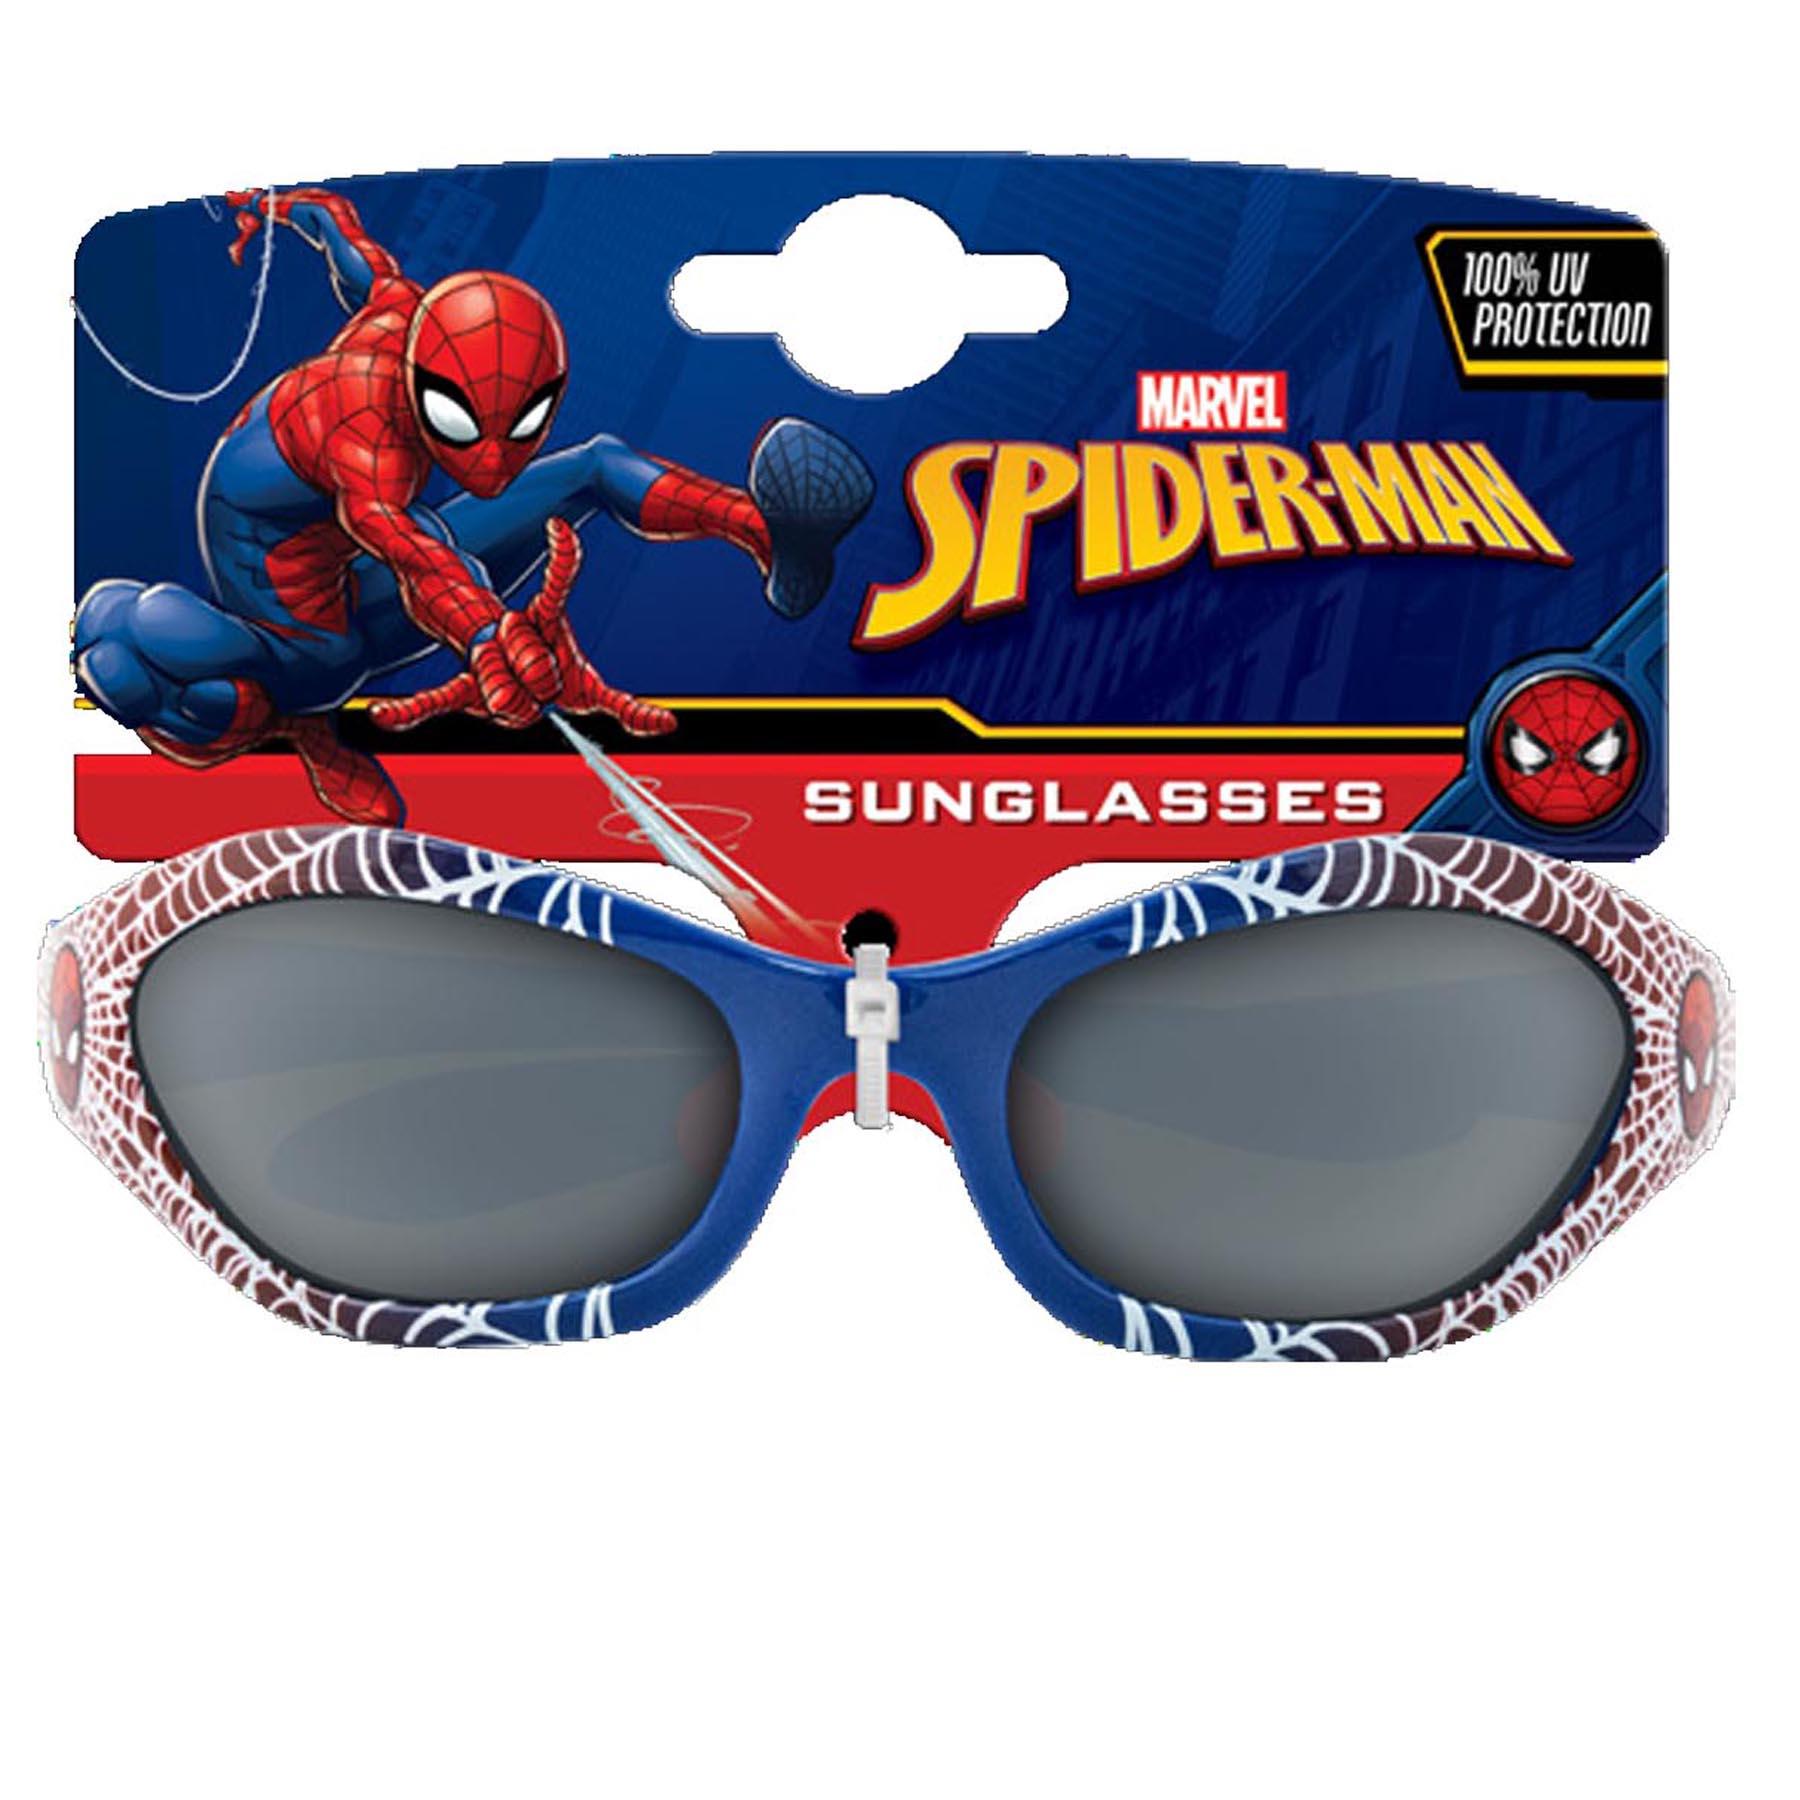 Superheroes Children's Sunglasses UV protection for Holiday - Marvel Spiderman SP10